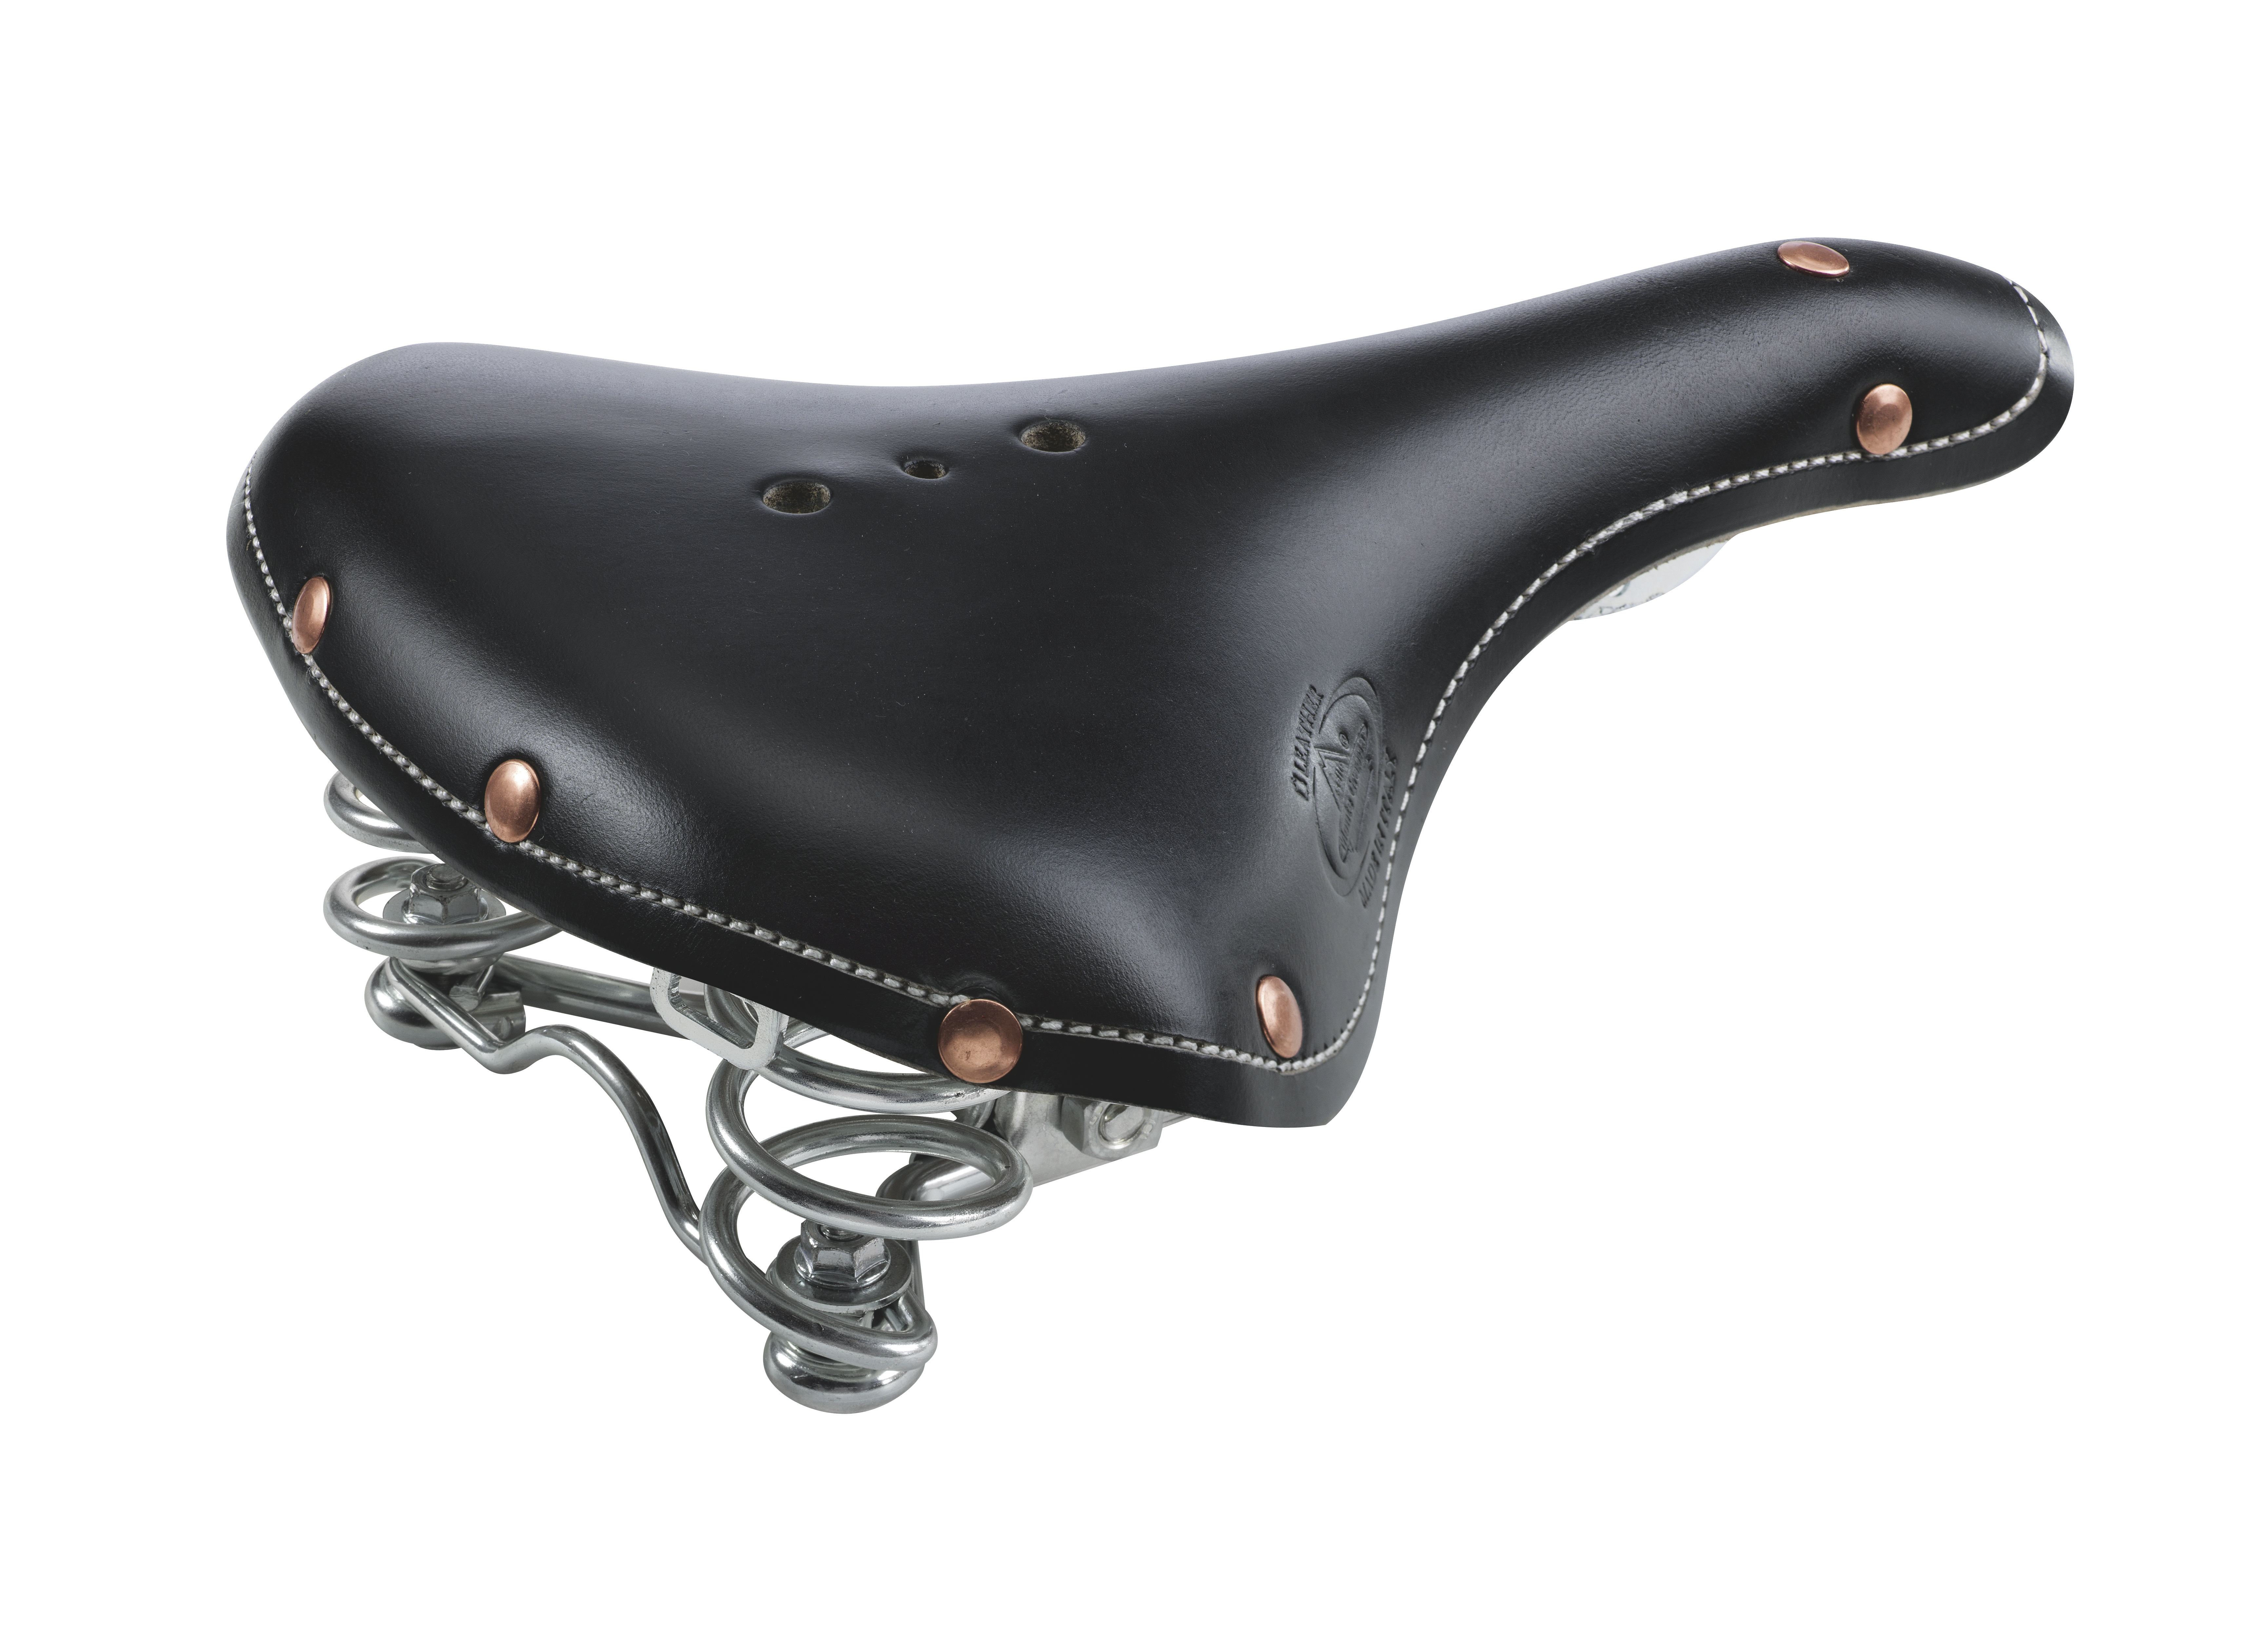 selle_monte_grappa_1960_go_by_bike